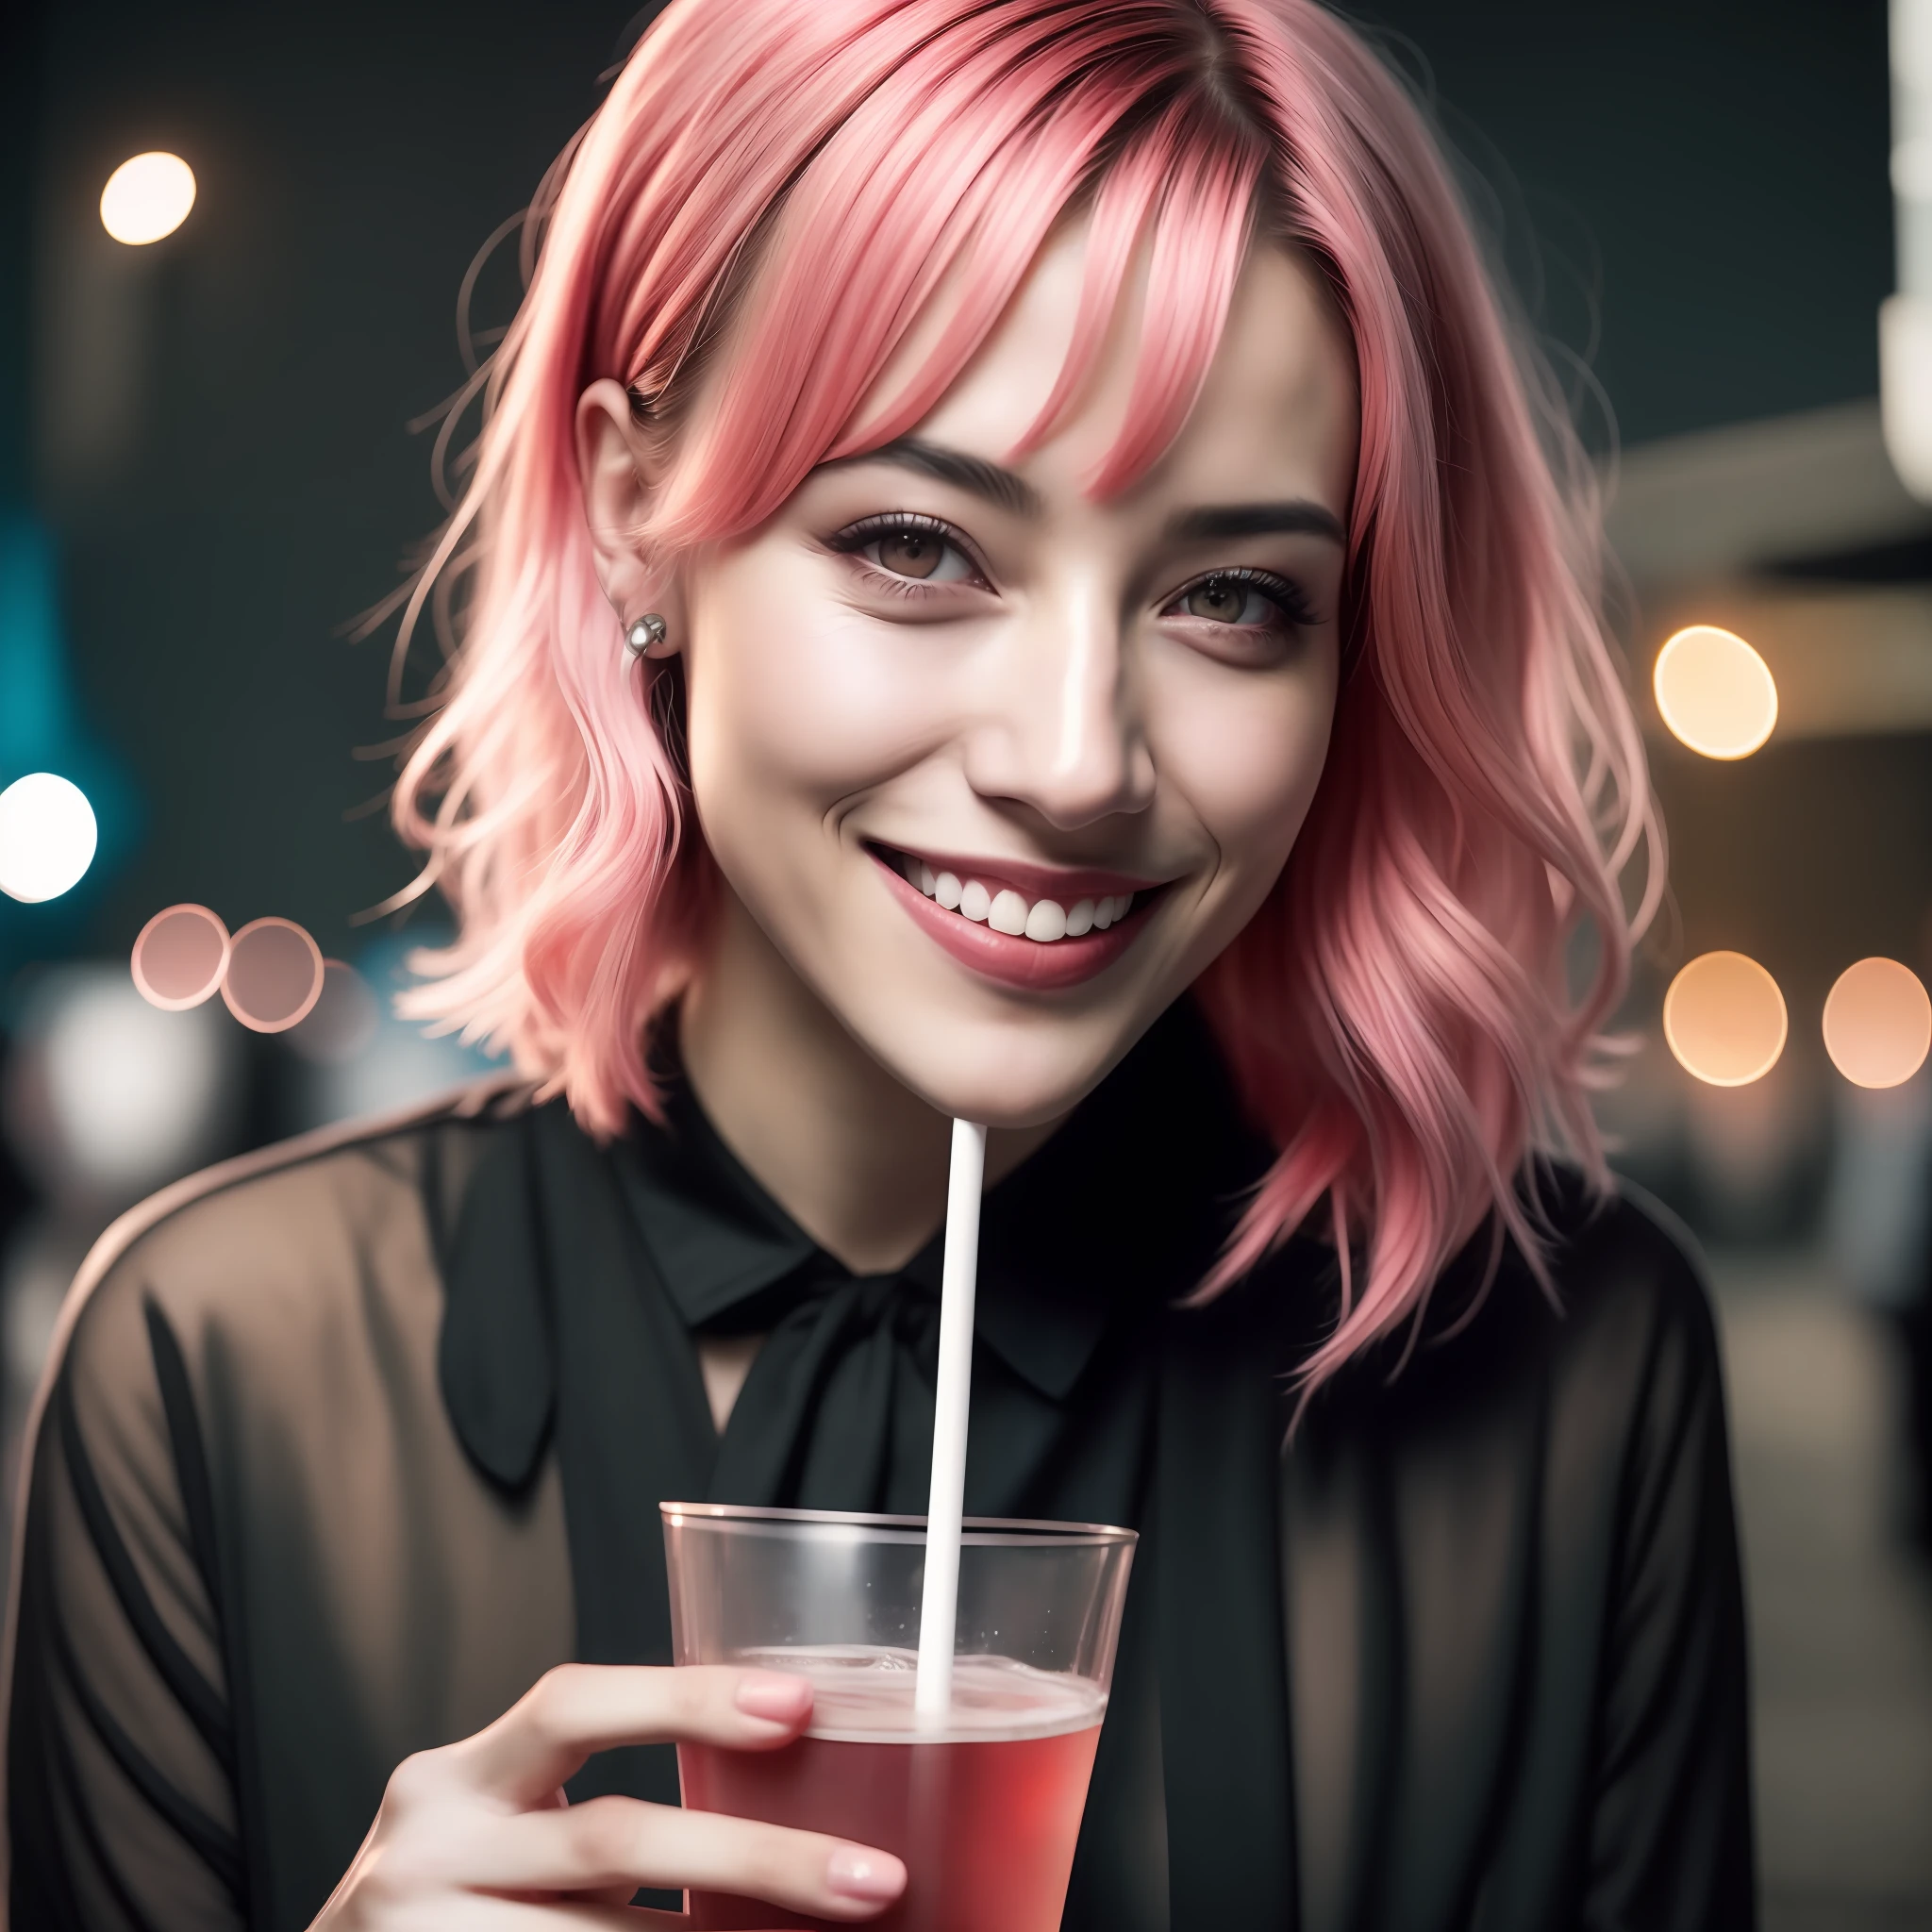 85mm photo portrait of a cute girl, smile, pink hair, 20 years old, flirting with camera, slate atmosphere, cinematic, faded colors, dark shot, muted colors, grainy film, lut, scary,drinking drink with straw in mouth sexy way at ballad, 